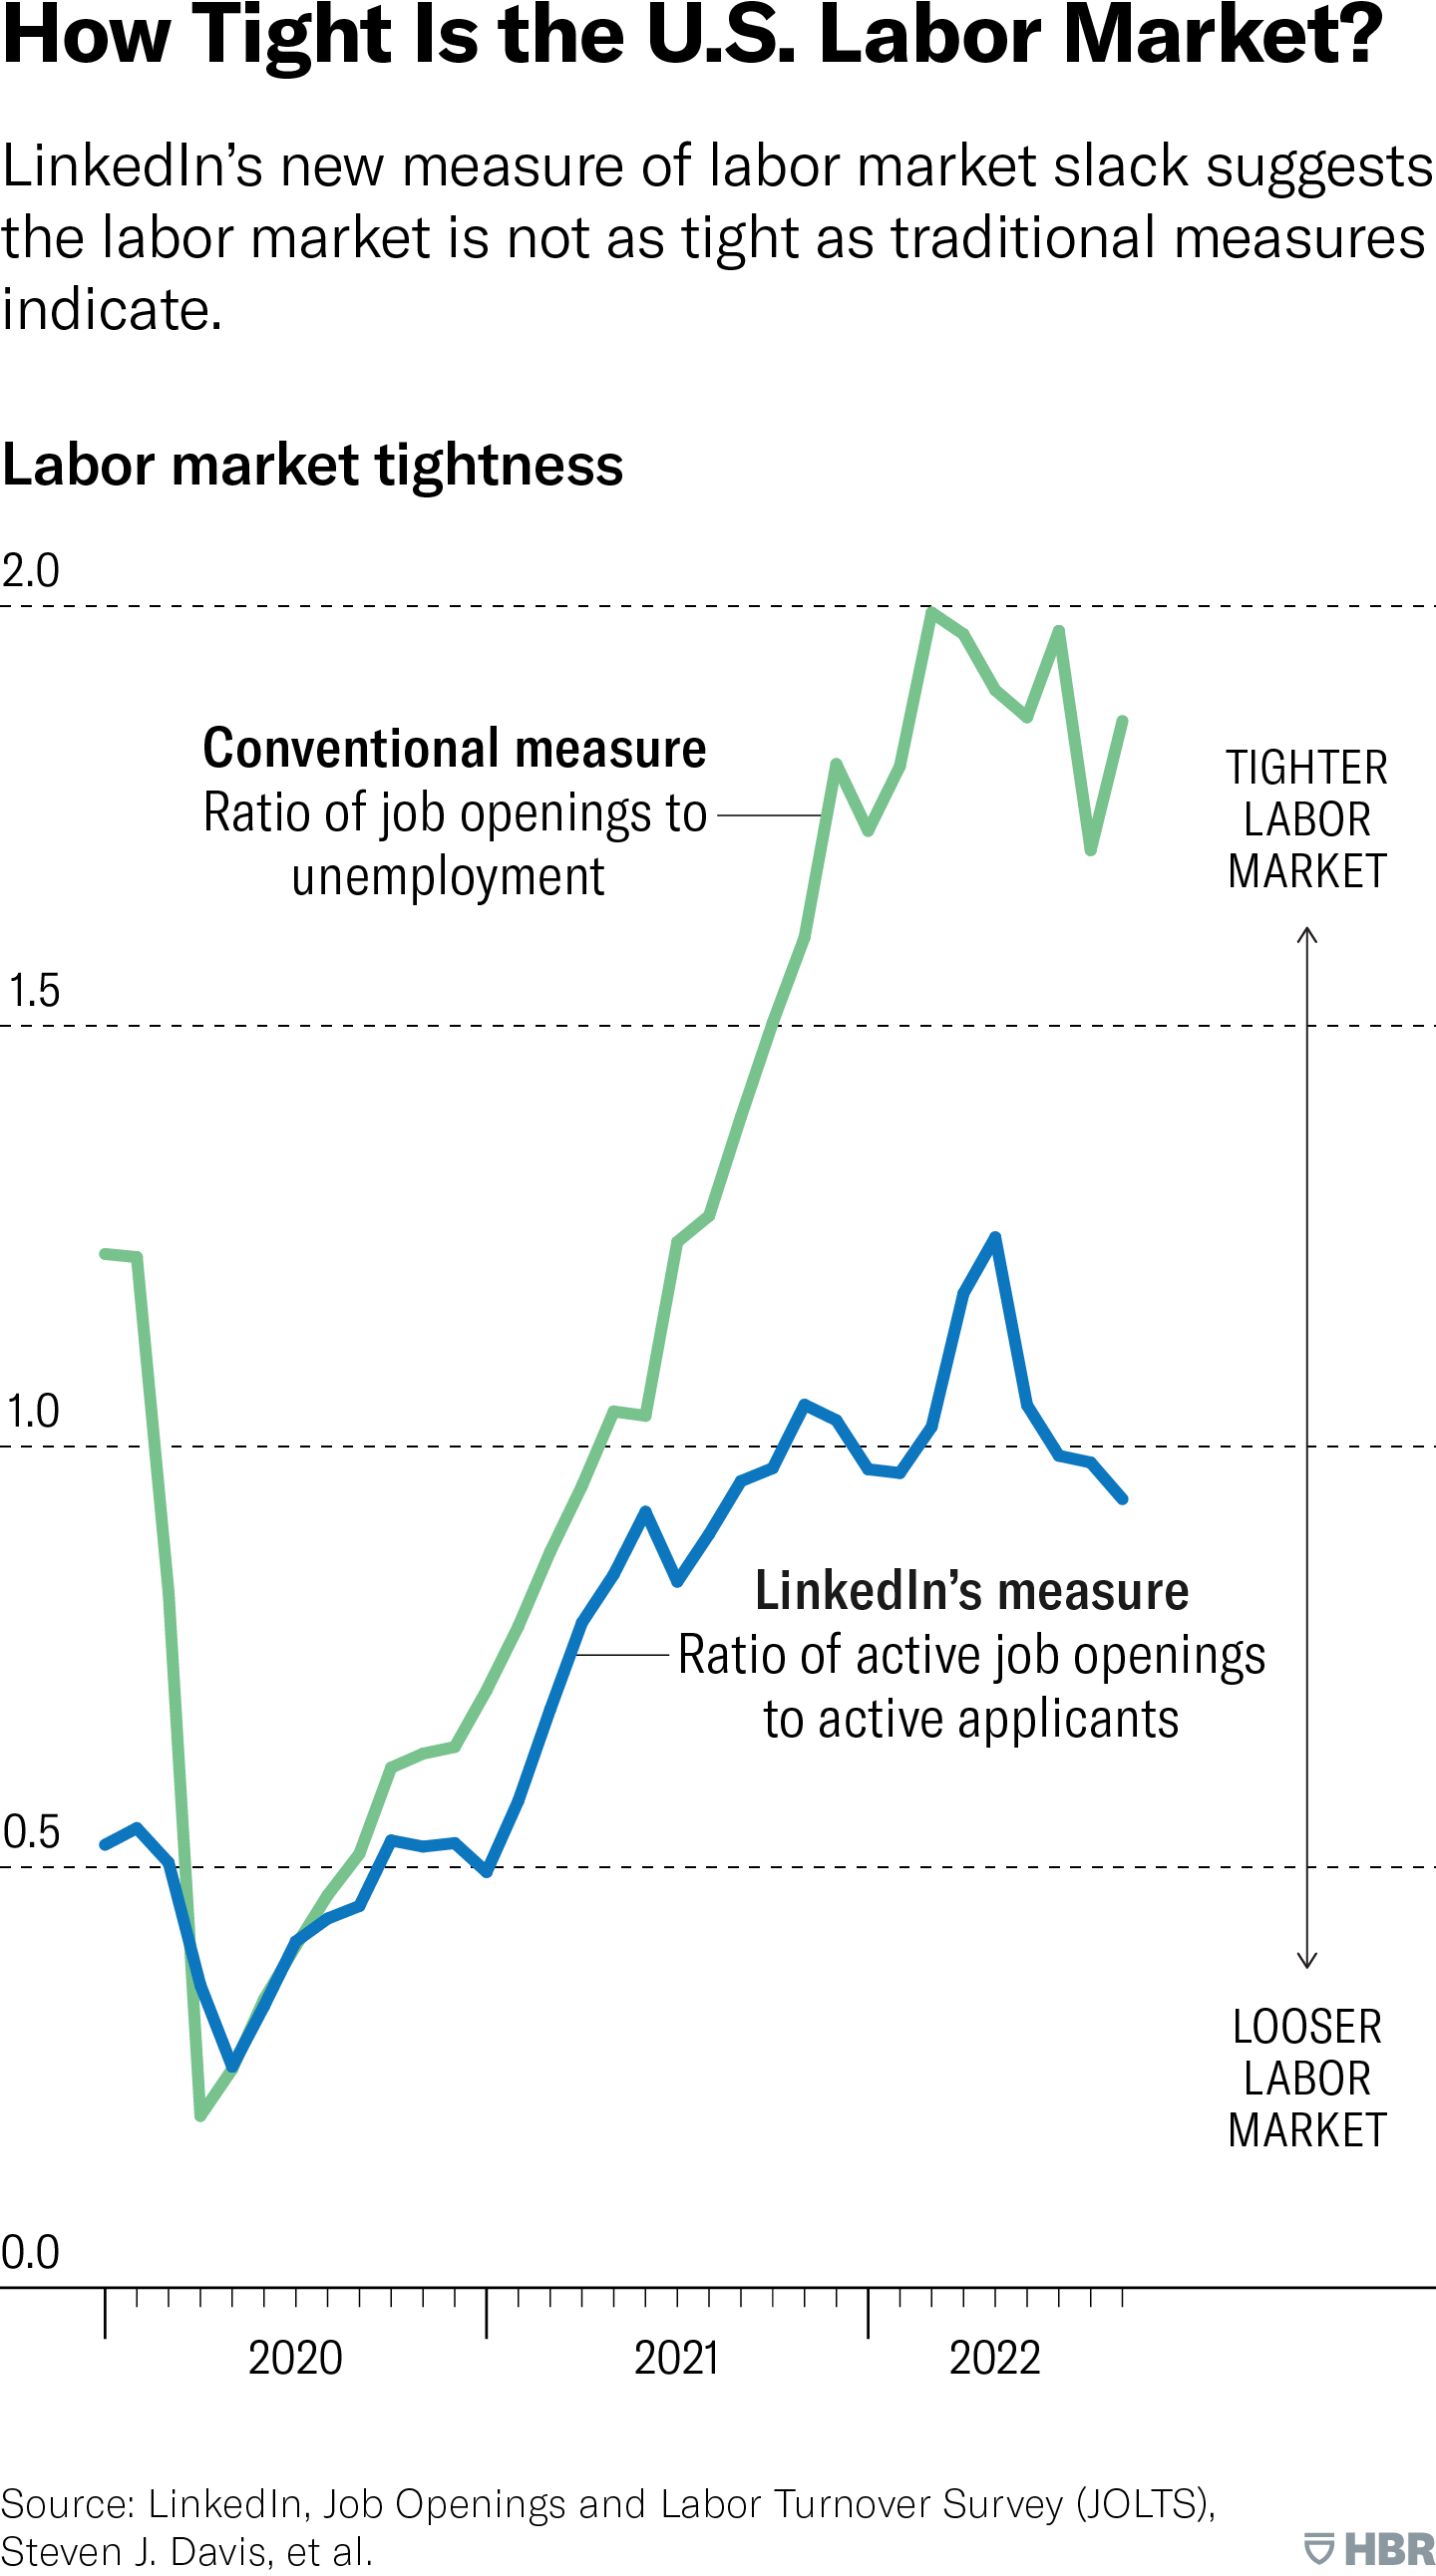 LinkedIn’s new measure of labor market slack suggests the labor market is not as tight as traditional measures indicate. This fever chart shows the conventional measure of the labor market, the ratio of job openings to unemployment, against LinkedIn’s measure, which looks at the ratio of active job openings to active applicants. As of September 2022, the conventional measure has risen to two since 2020, while LinkedIn’s measure has risen but leveled out around one. Source: LinkedIn, Job Openings and Labor Turnover Survey, ( or JOLTS), Steven J. Davis, et al.